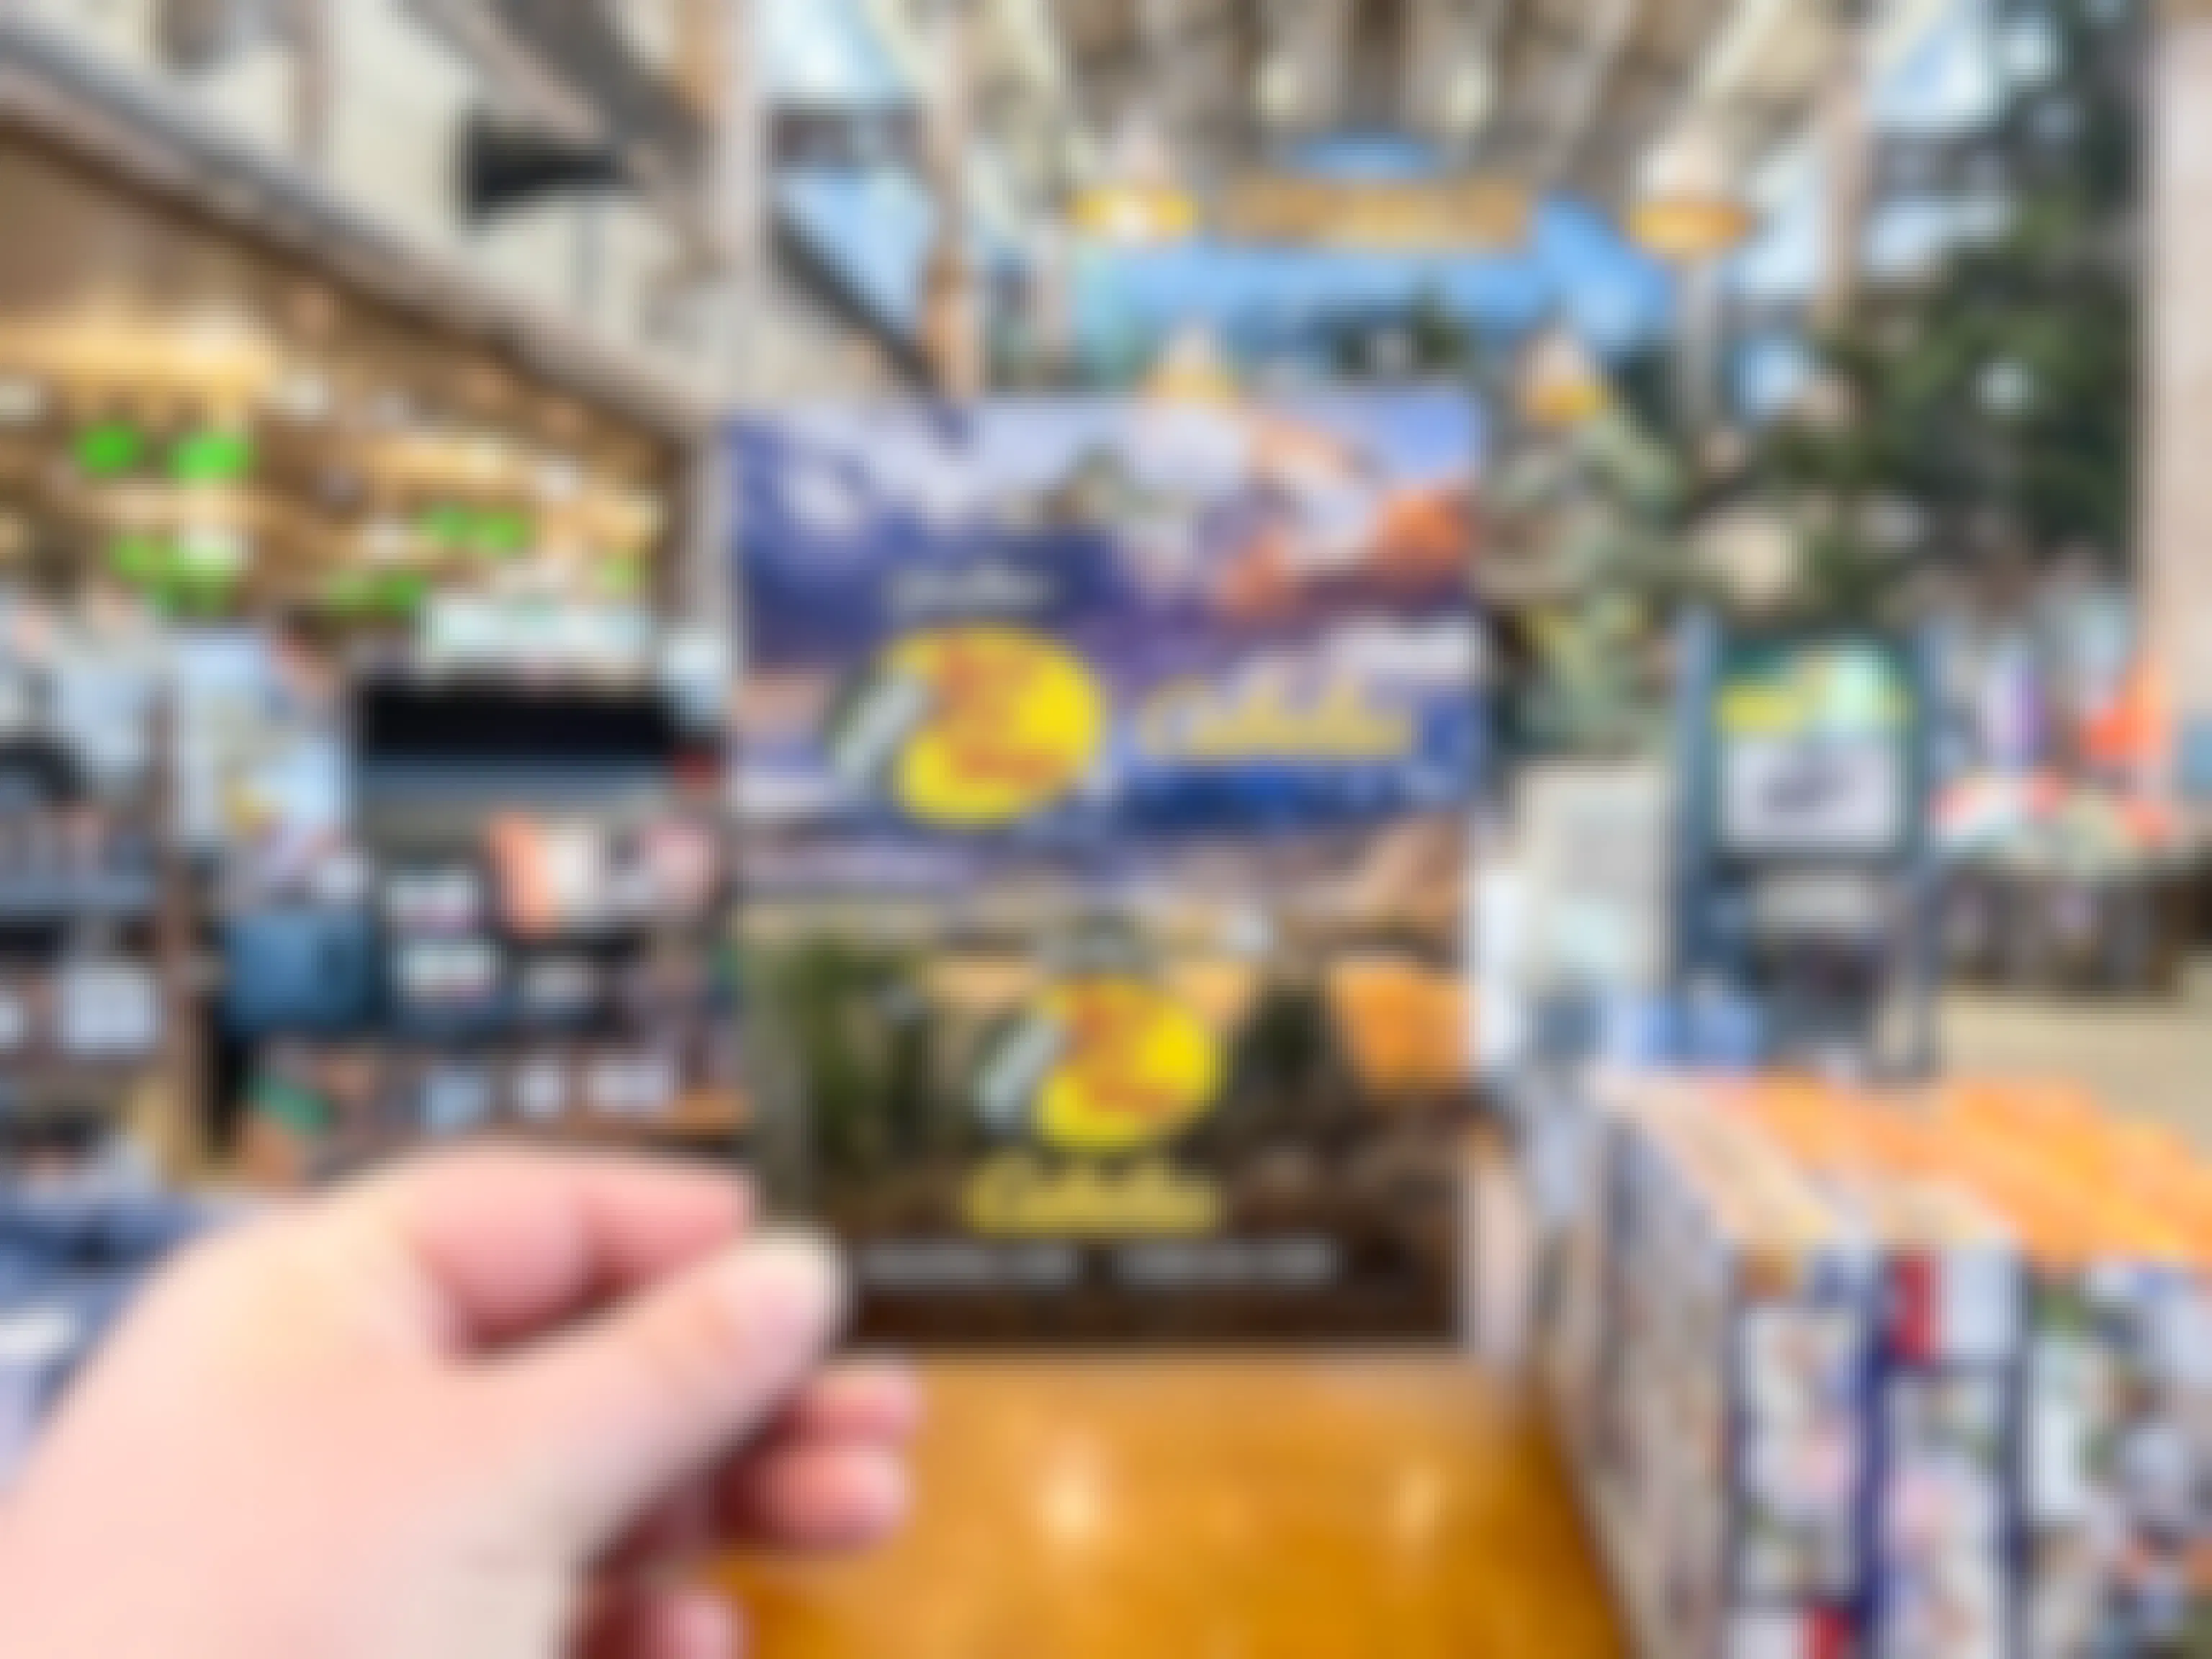 A person's hand holding a Bass Pro Shops/Cabela's gift card inside a Cabela's store.